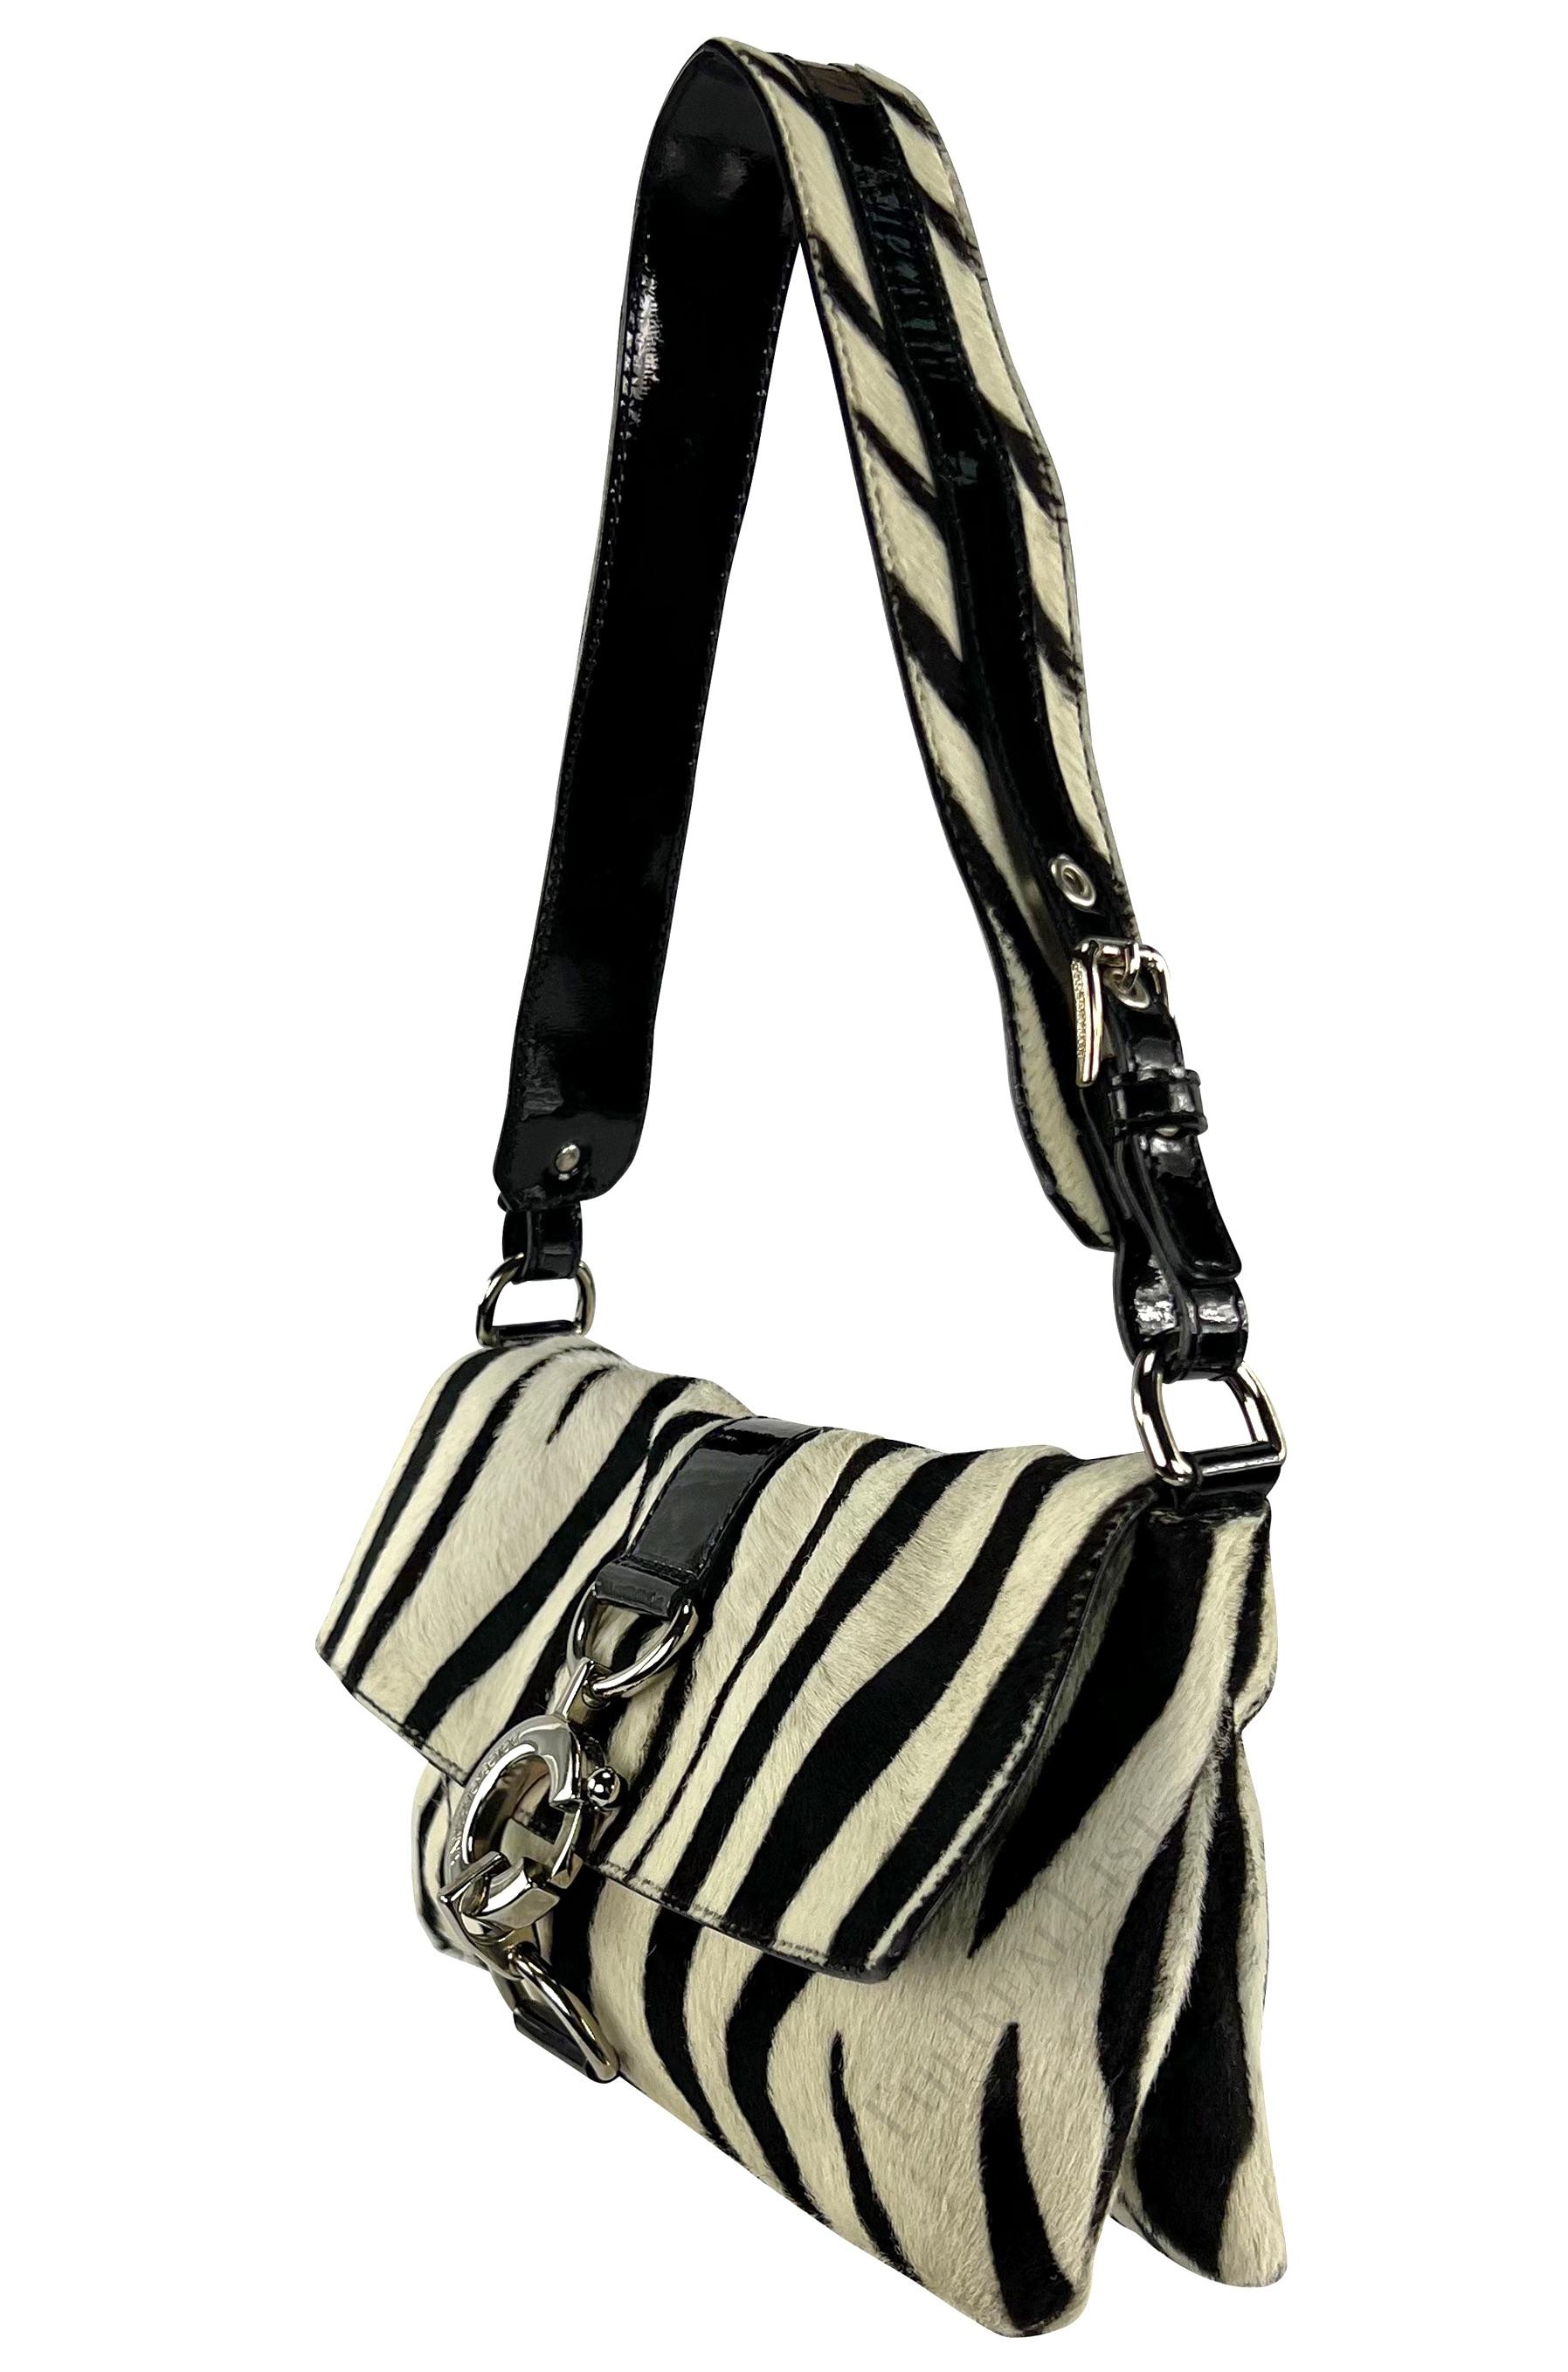 Presenting a fabulous zebra print Dolce & Gabbana pony hair shoulder bag. From the early 2000s and constructed of pony hair, the bag boasts a timeless black and white zebra pattern, complemented by refined silver-tone hardware and patent leather